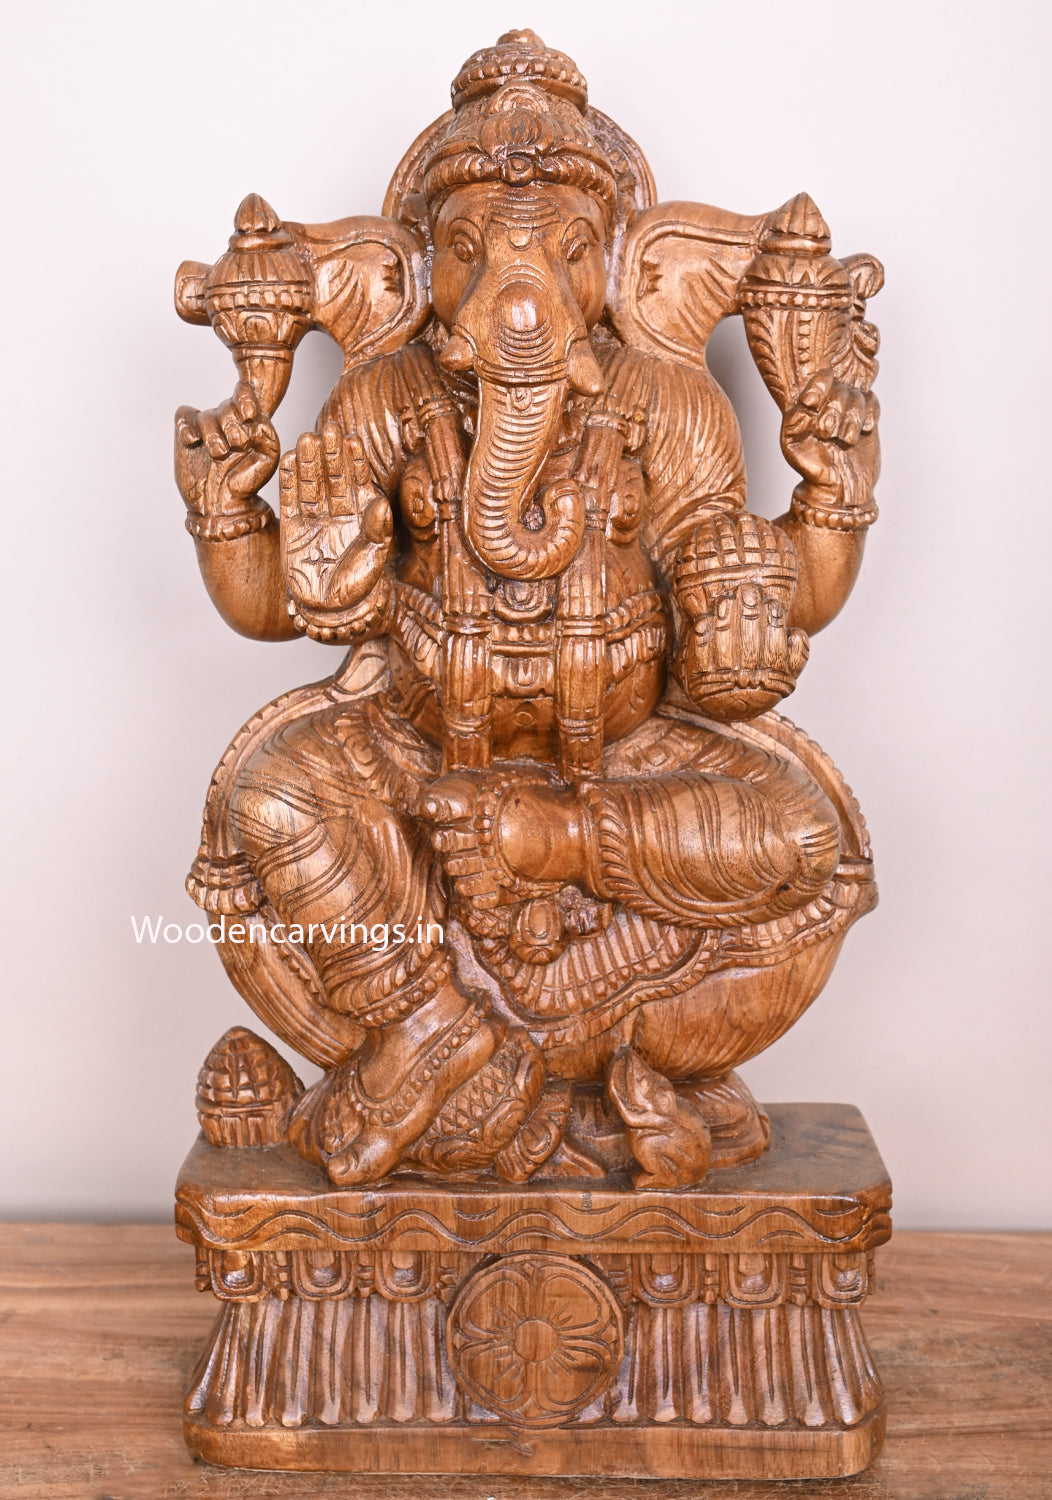 Ready For Your Beautiful Home Polished Blessing Ganapathy Holding Ladoo in His Hand Handcraft Sculpture 24"